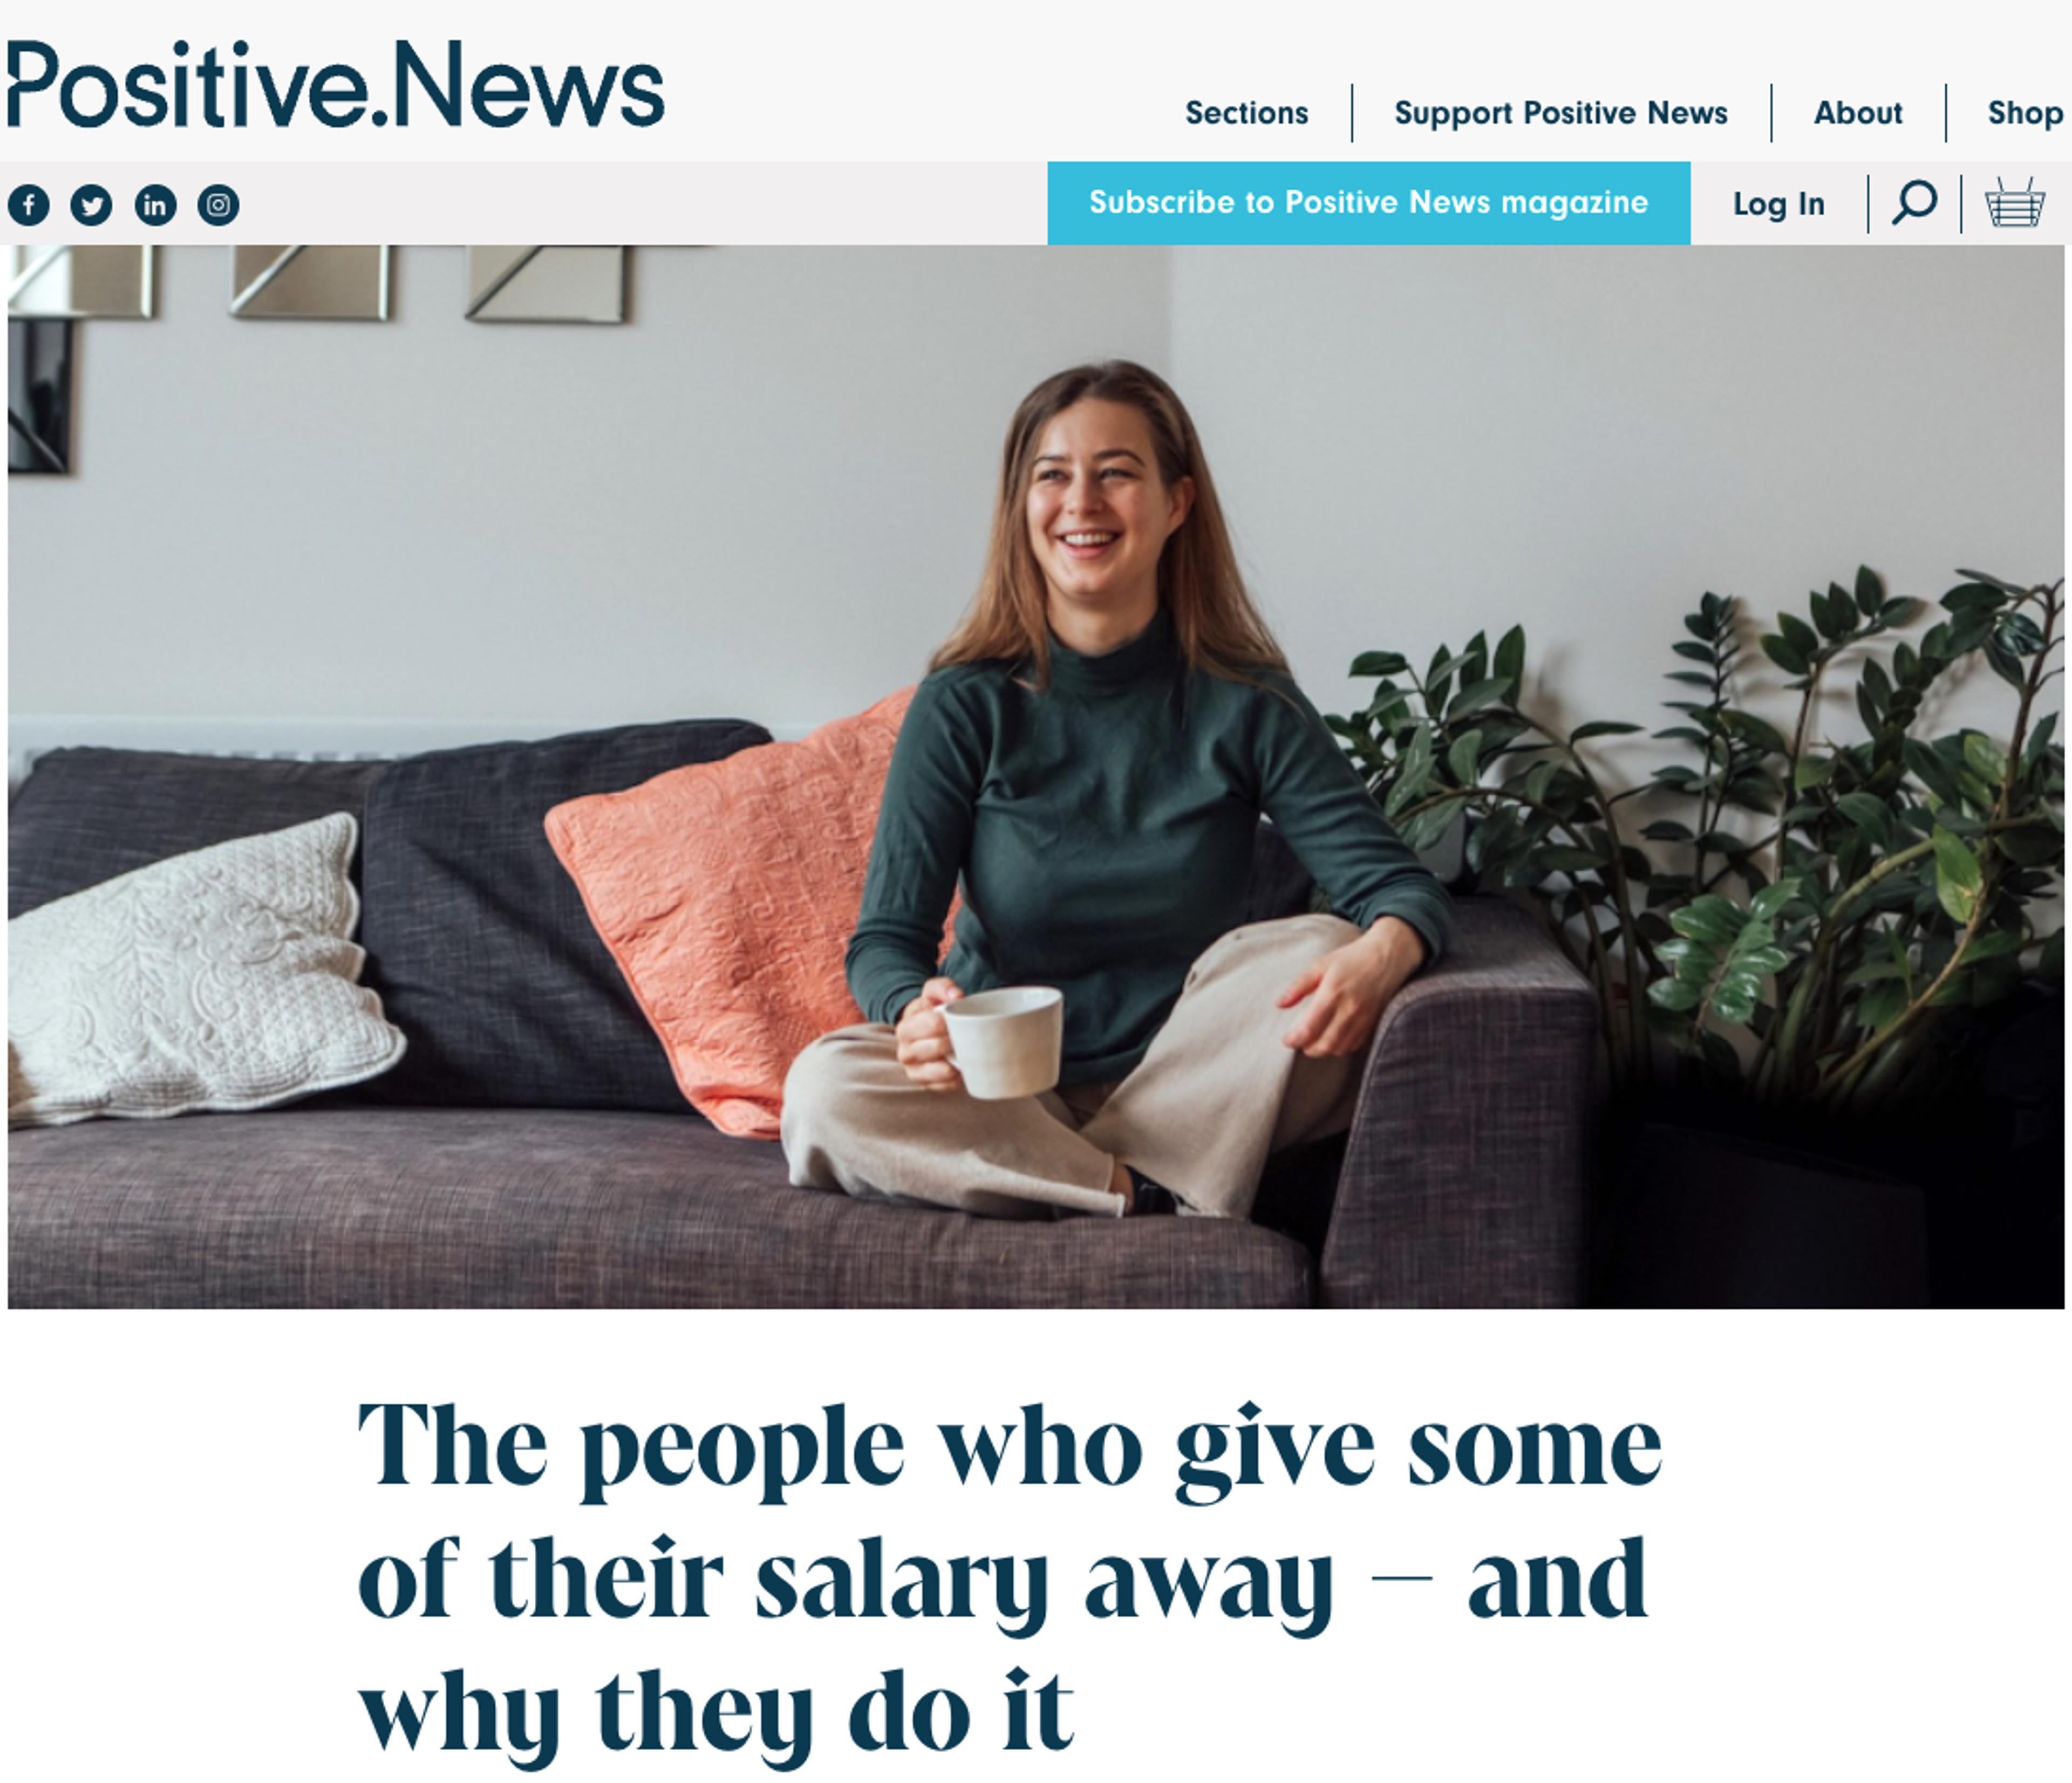 a screenshot of an article called "the people who give some of their salary away' - and why they do it